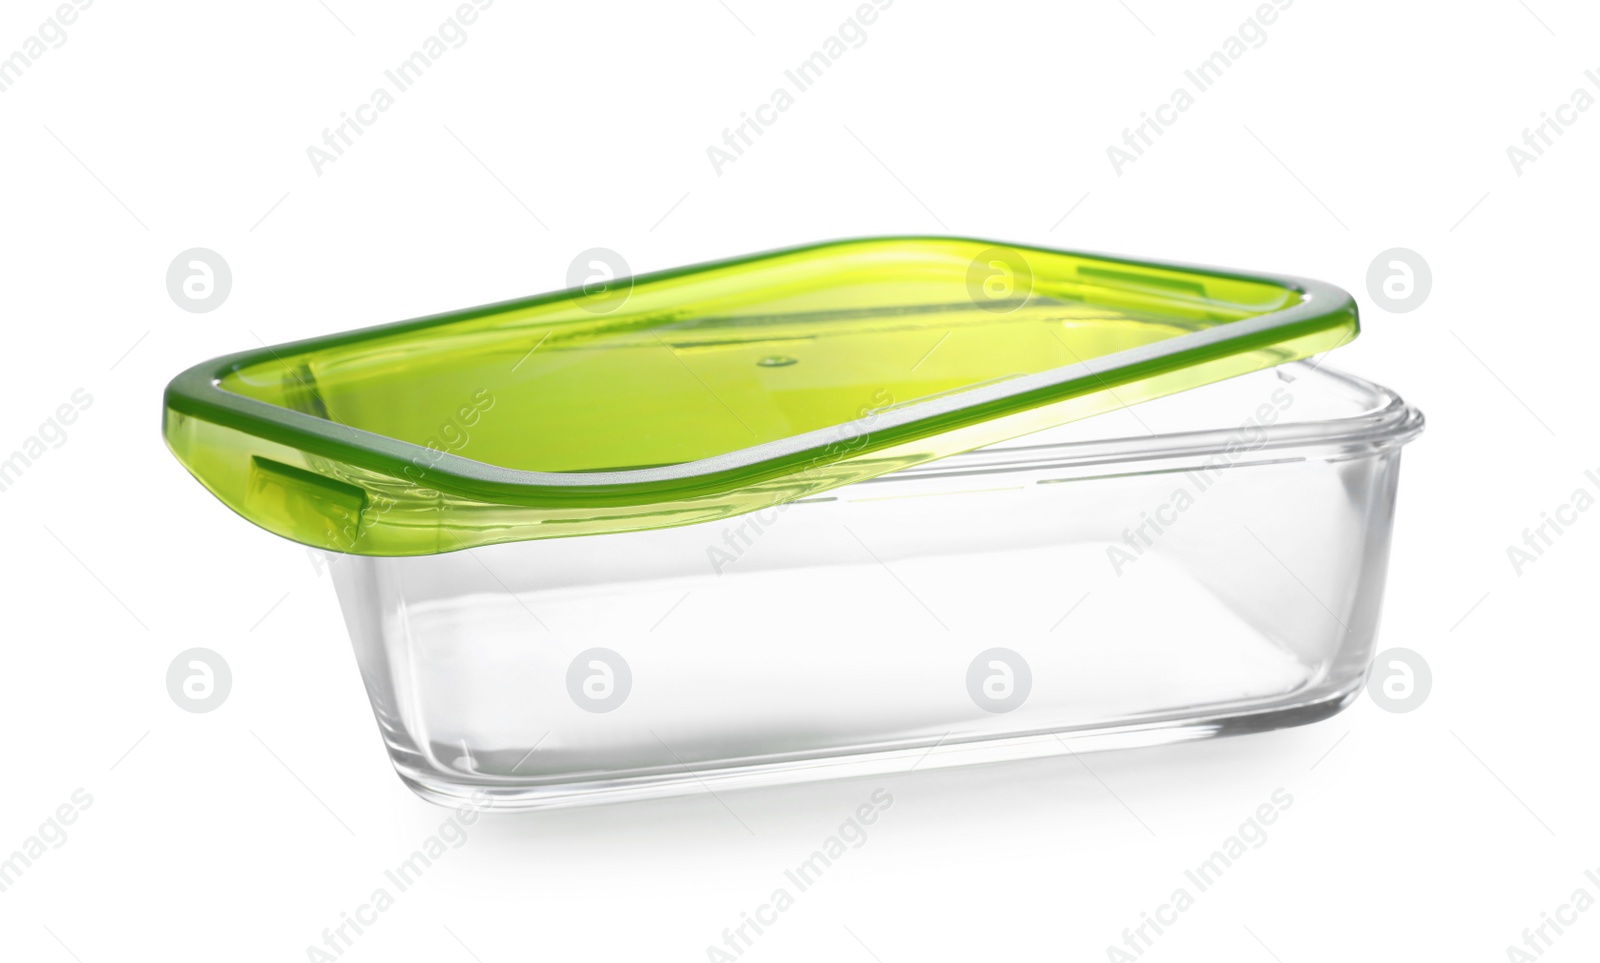 Photo of Empty glass container for food isolated on white